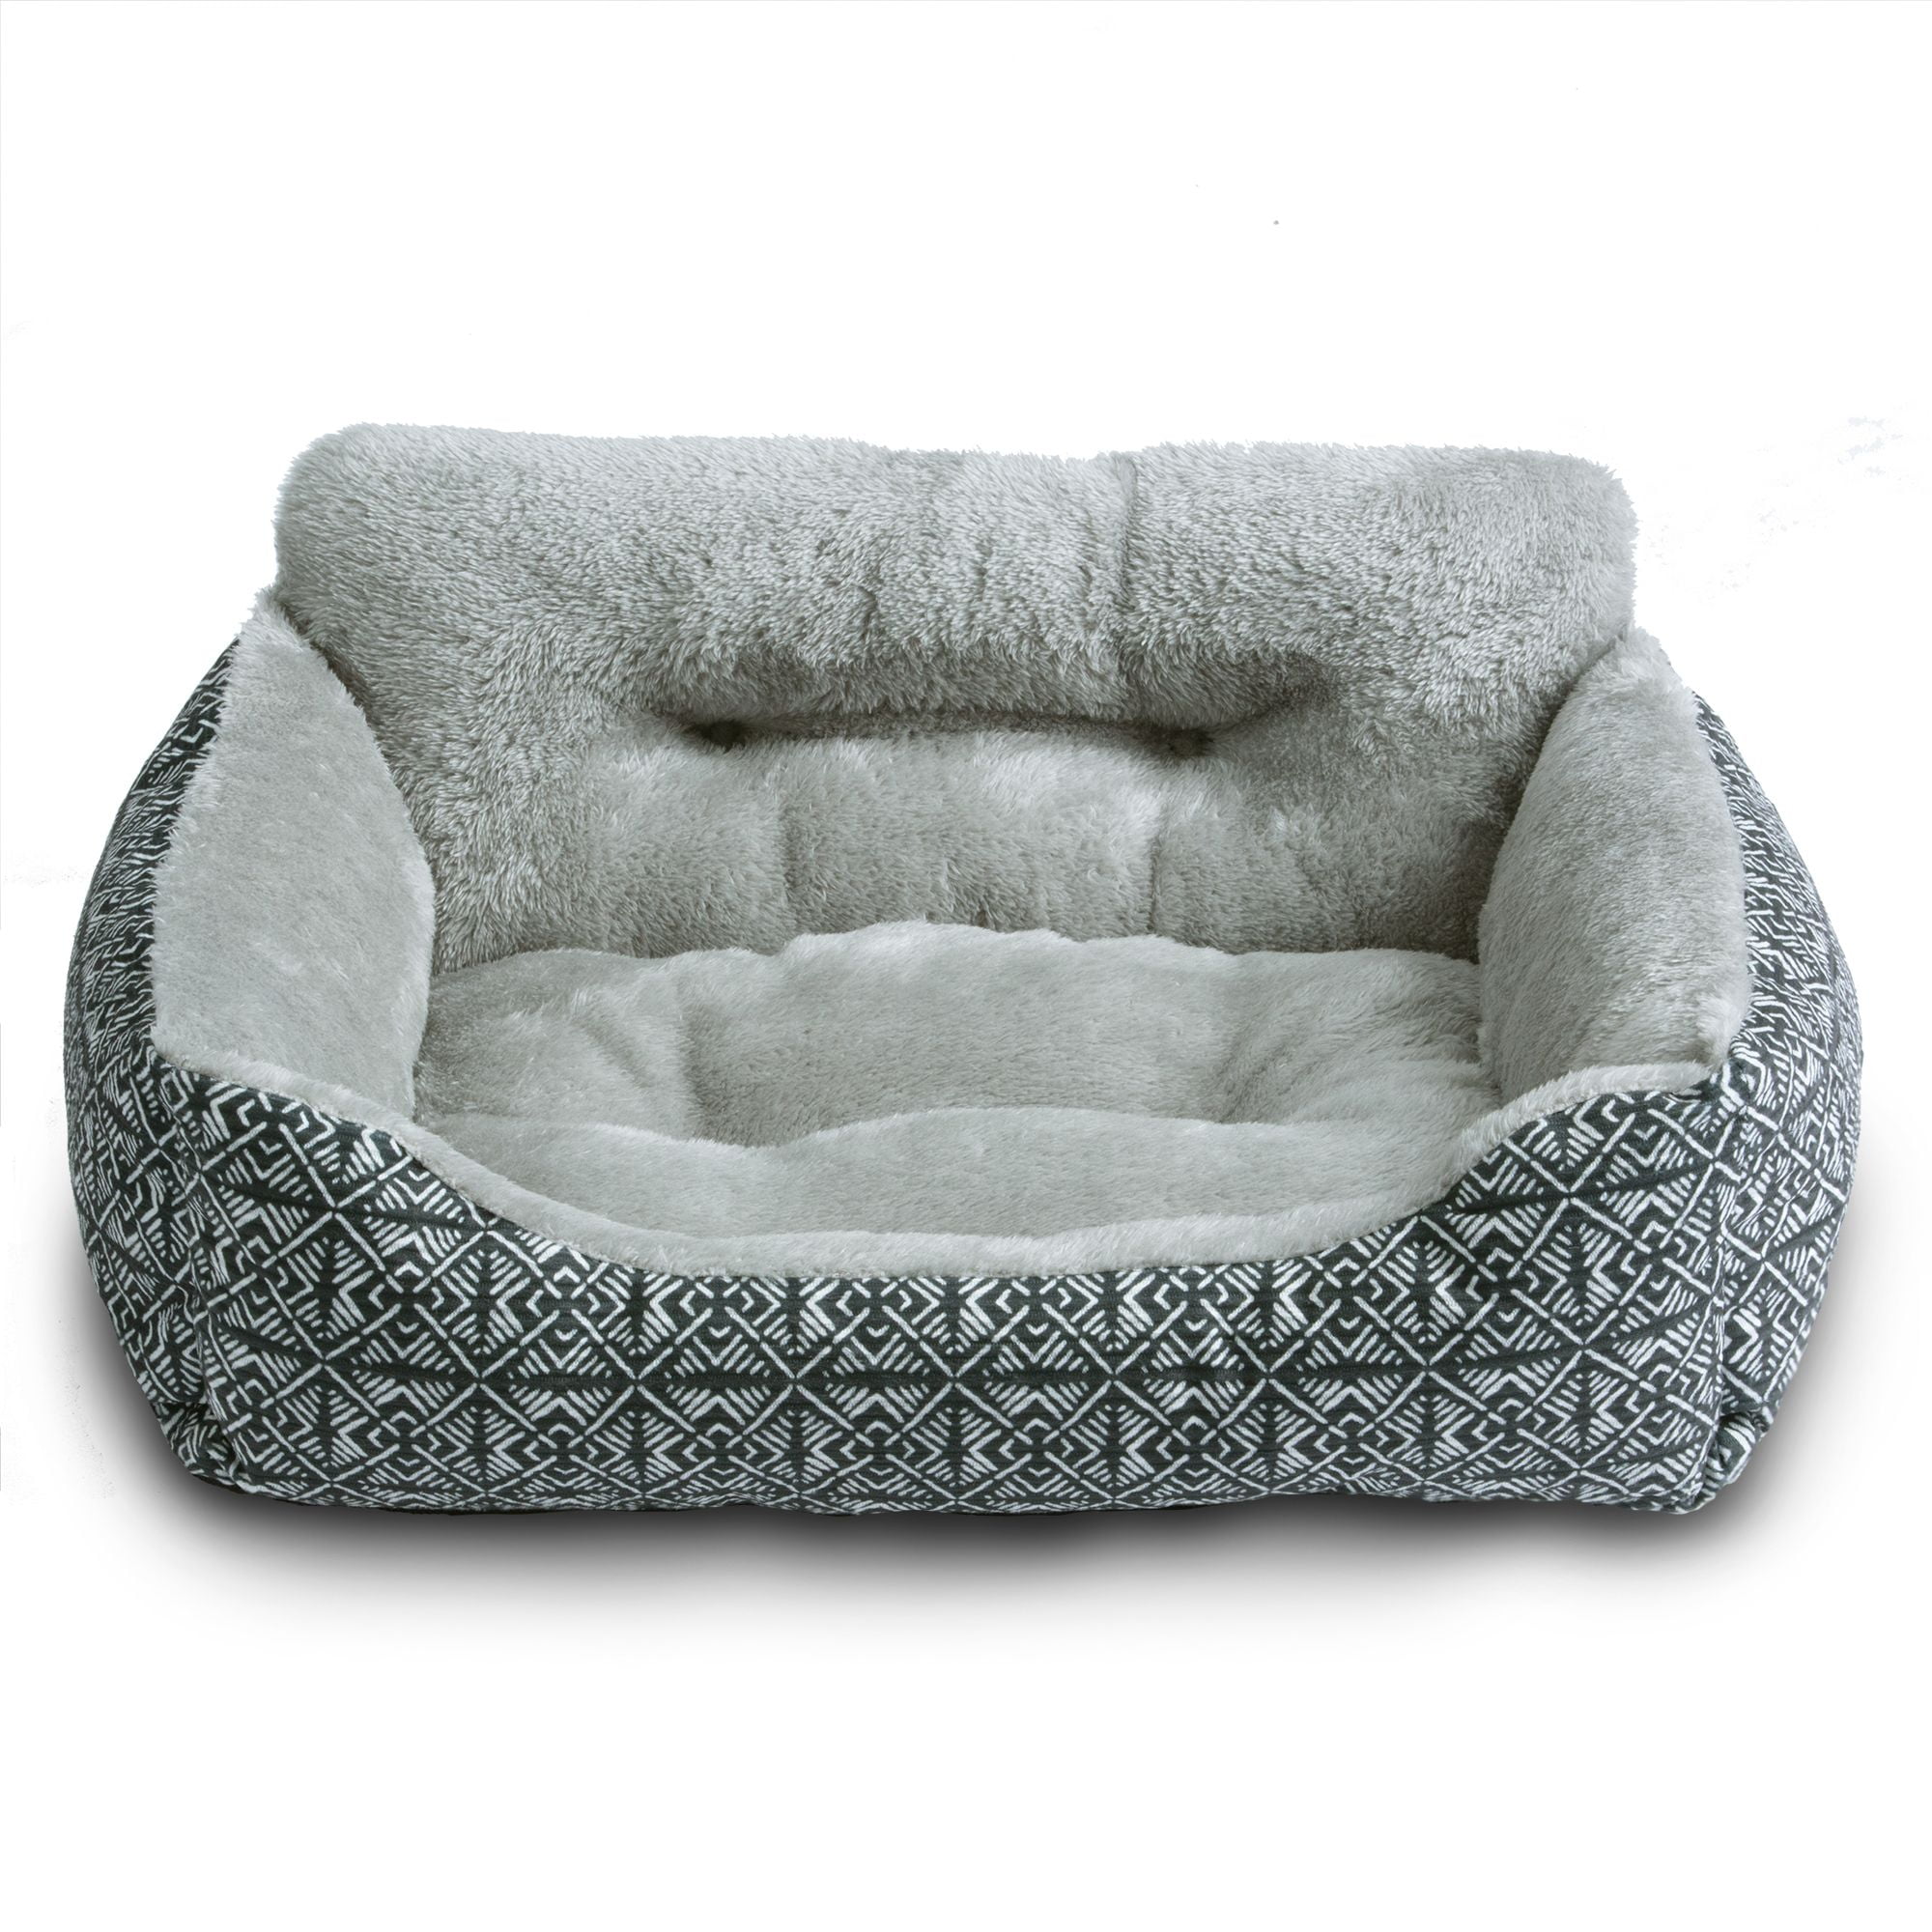 Vibrant Life Lounger Pet Bed, Small, 21 x 17